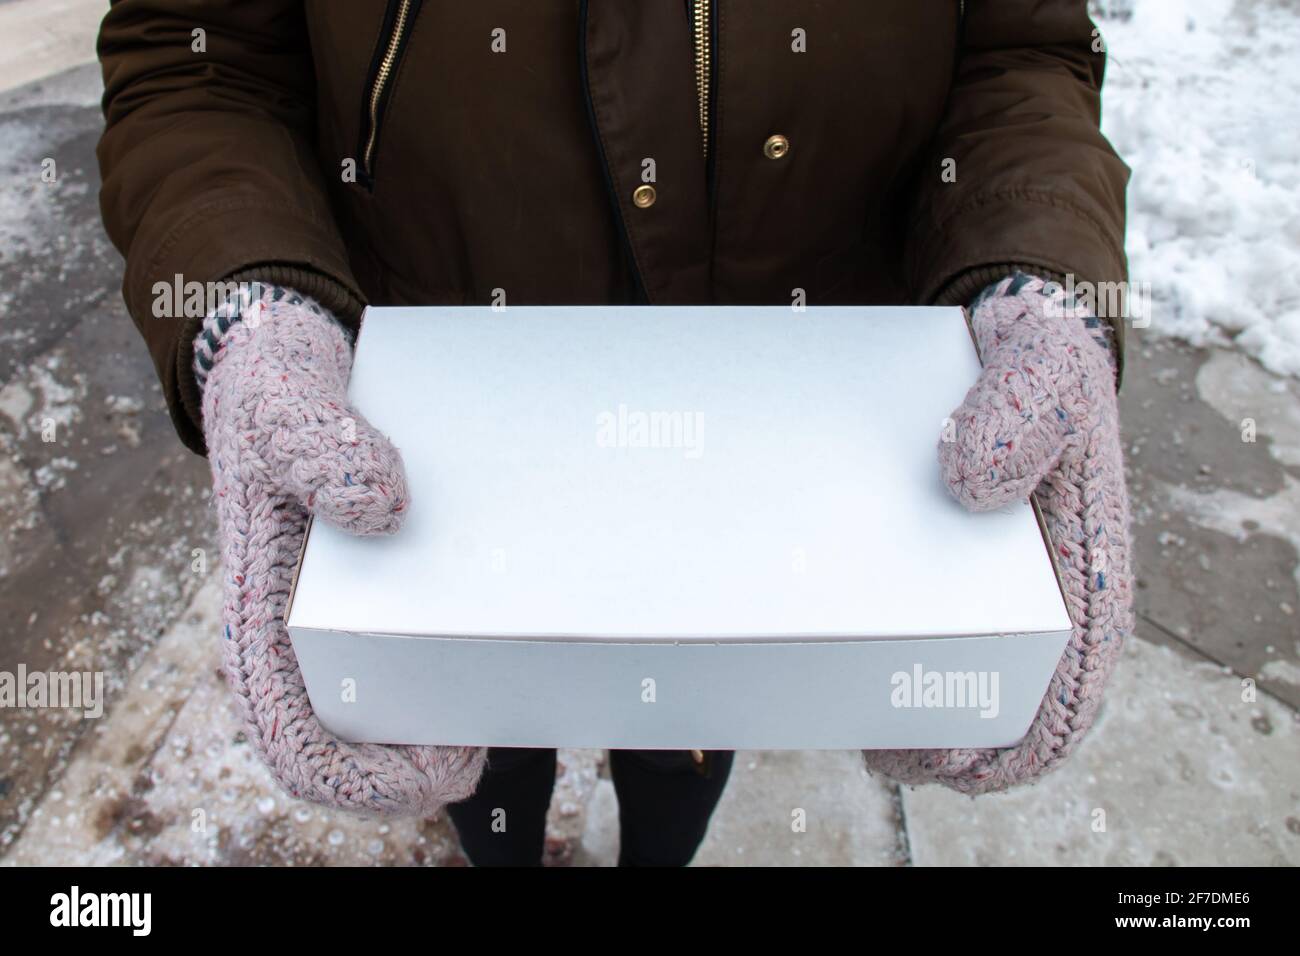 Woman holding a box of donuts in London, Ontario, Canada during February 2021. Photo includes blank space on the takeaway container for logos. Stock Photo